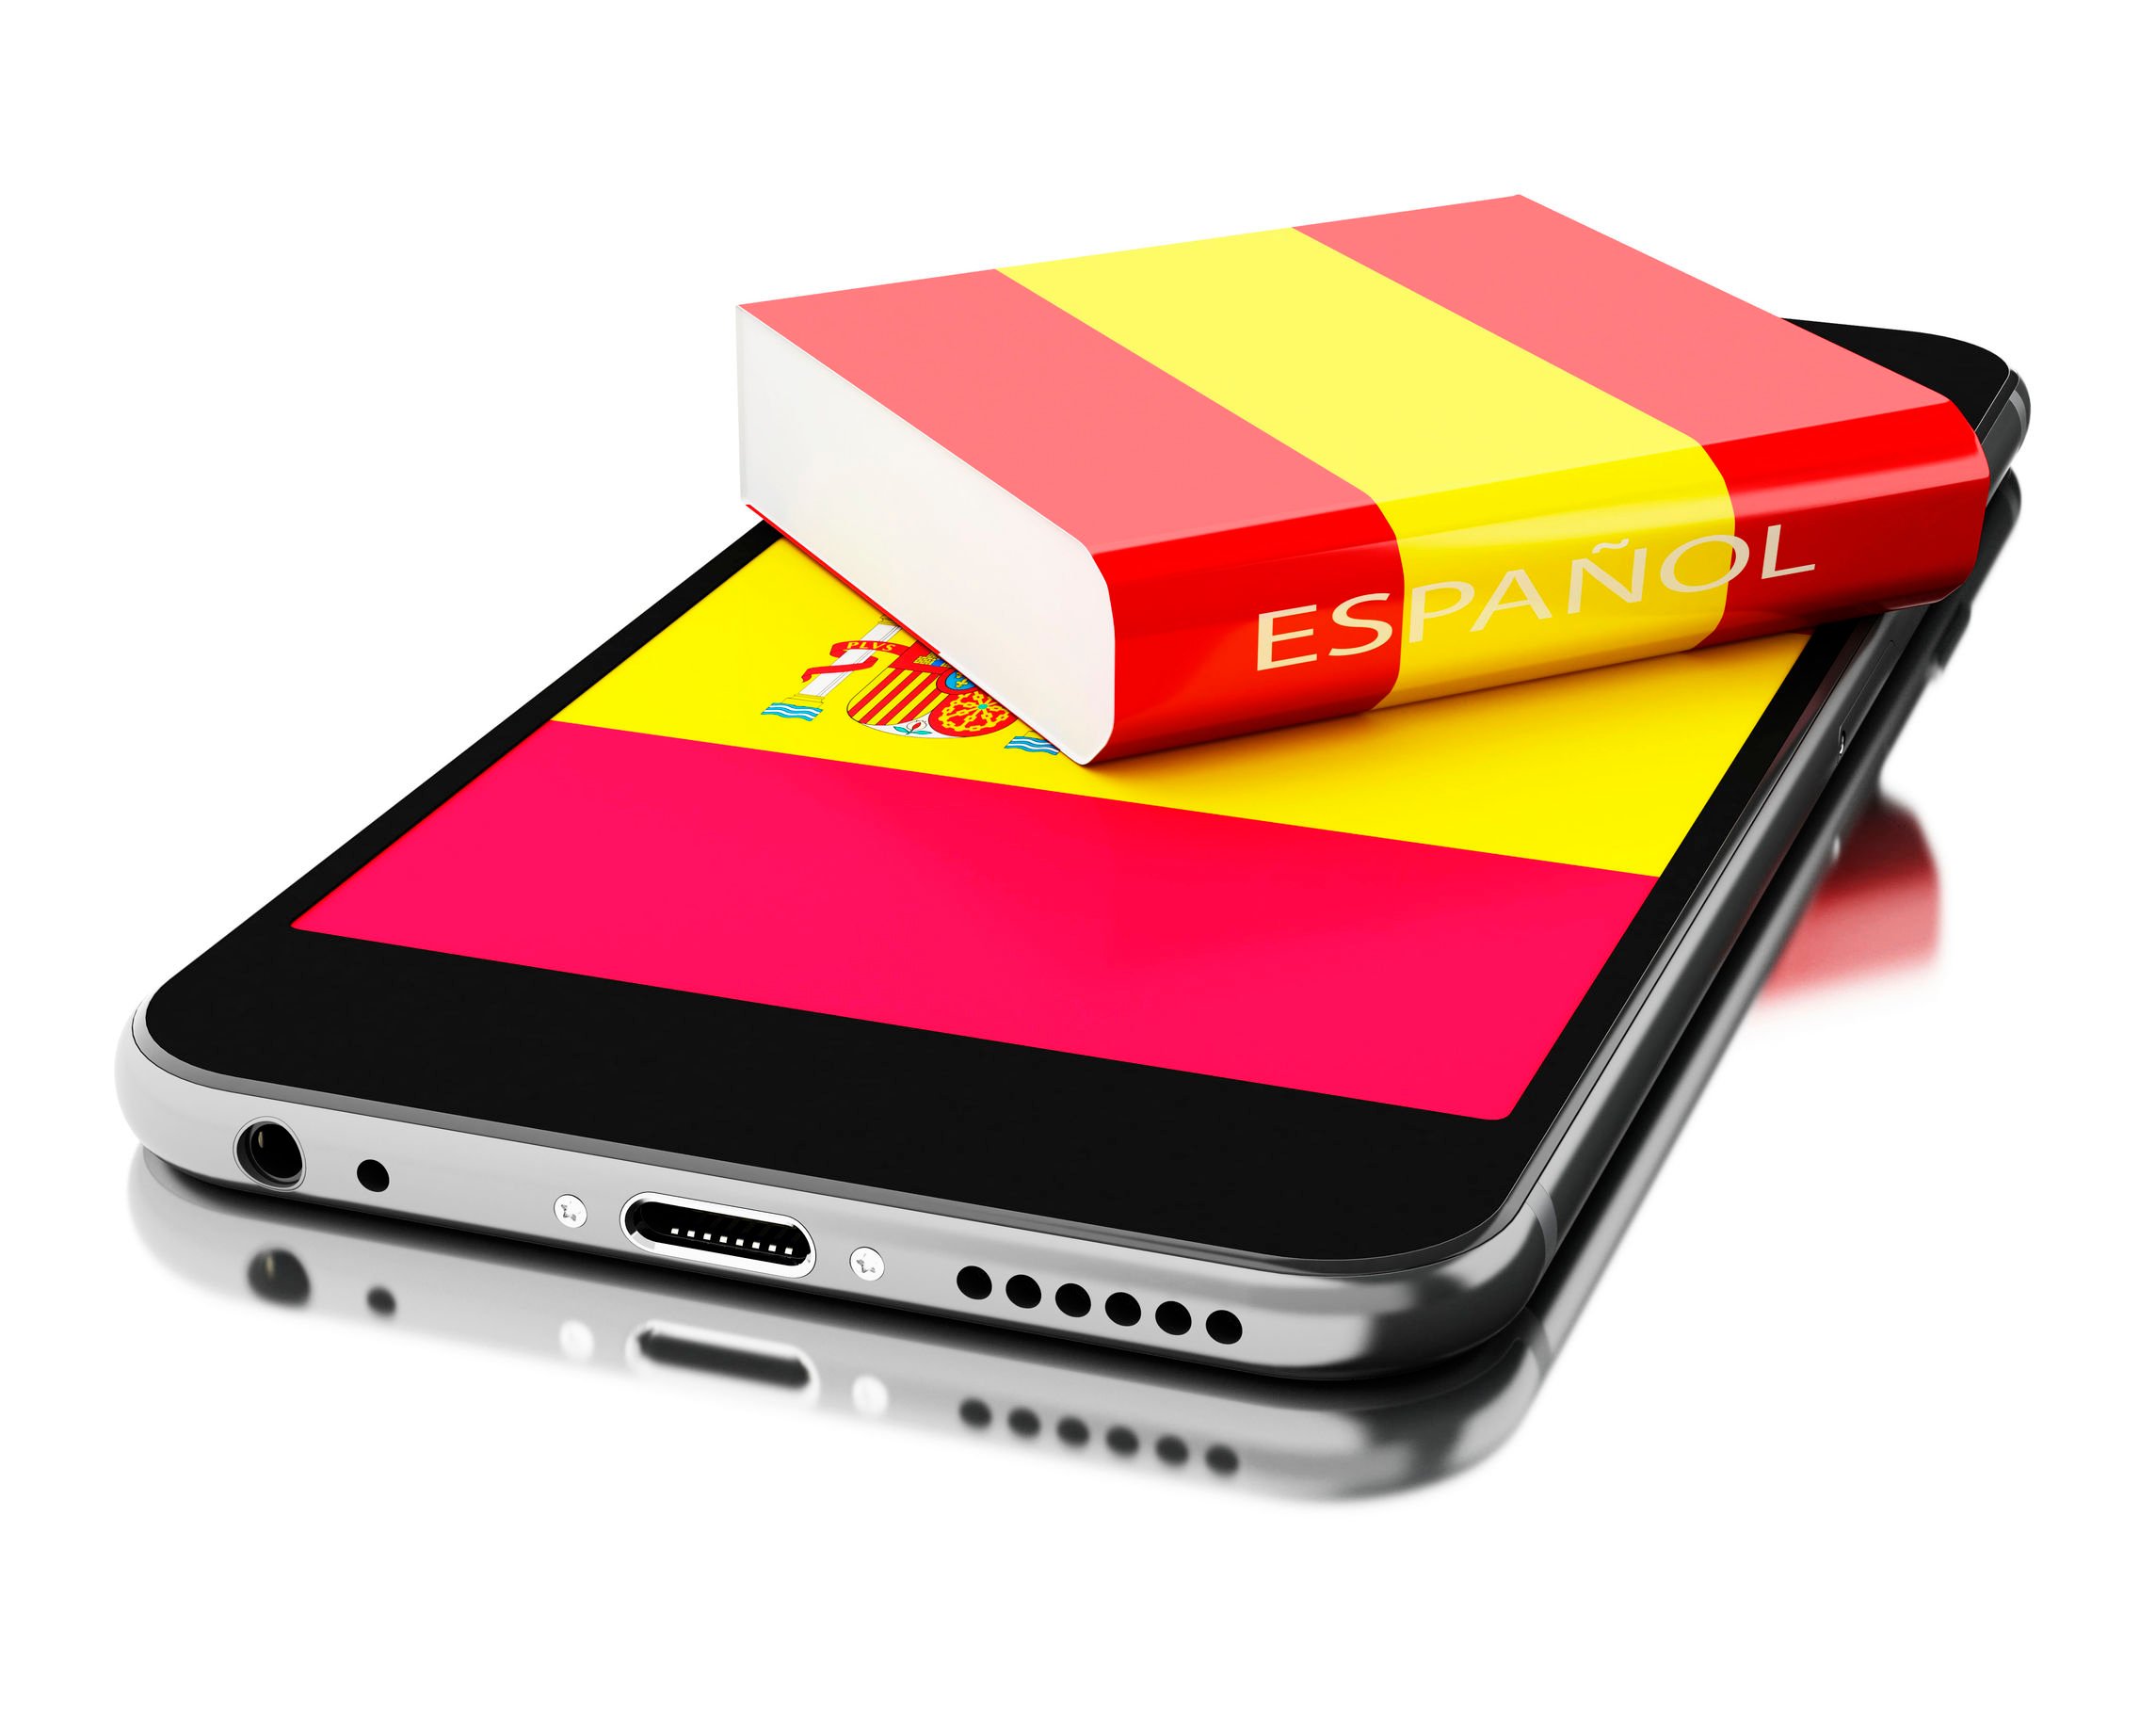 spanish dictionary and mobile device